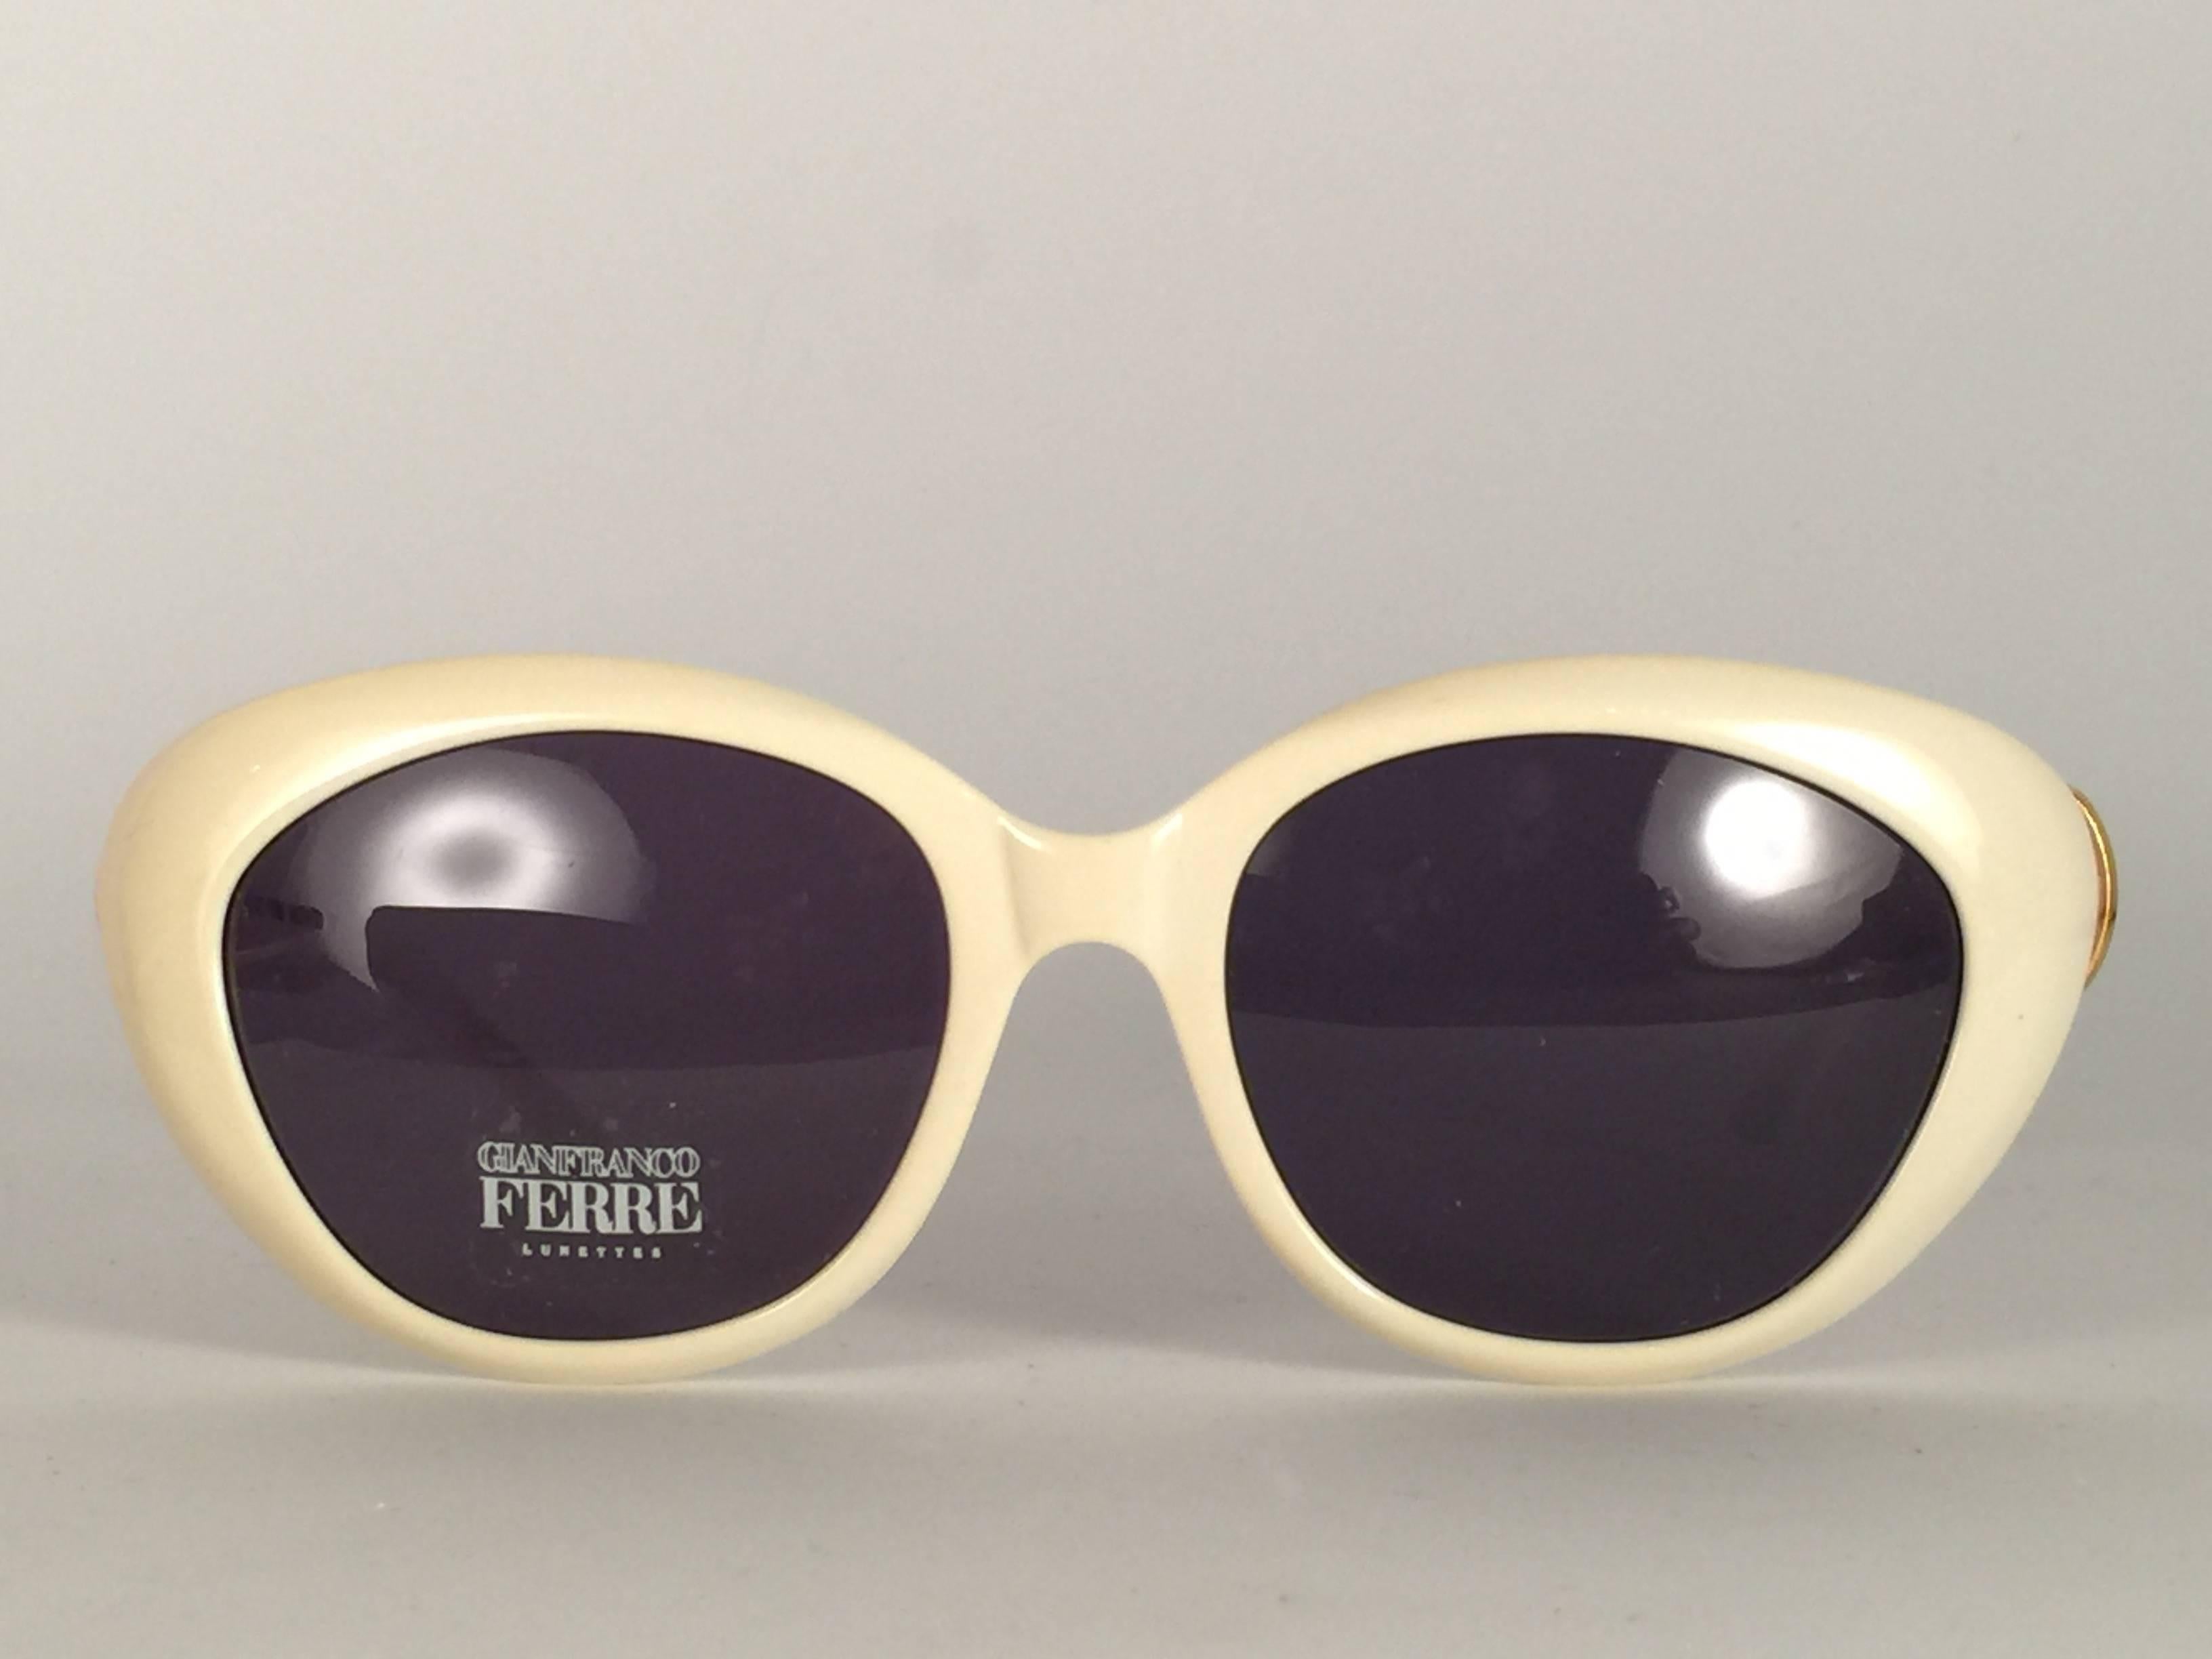 New vintage Gianfranco Ferre sunglasses.    

Ivory with rhinestones details frame holding a pair of spotless grey lenses.   

New, never worn or displayed. 

Made in Italy.